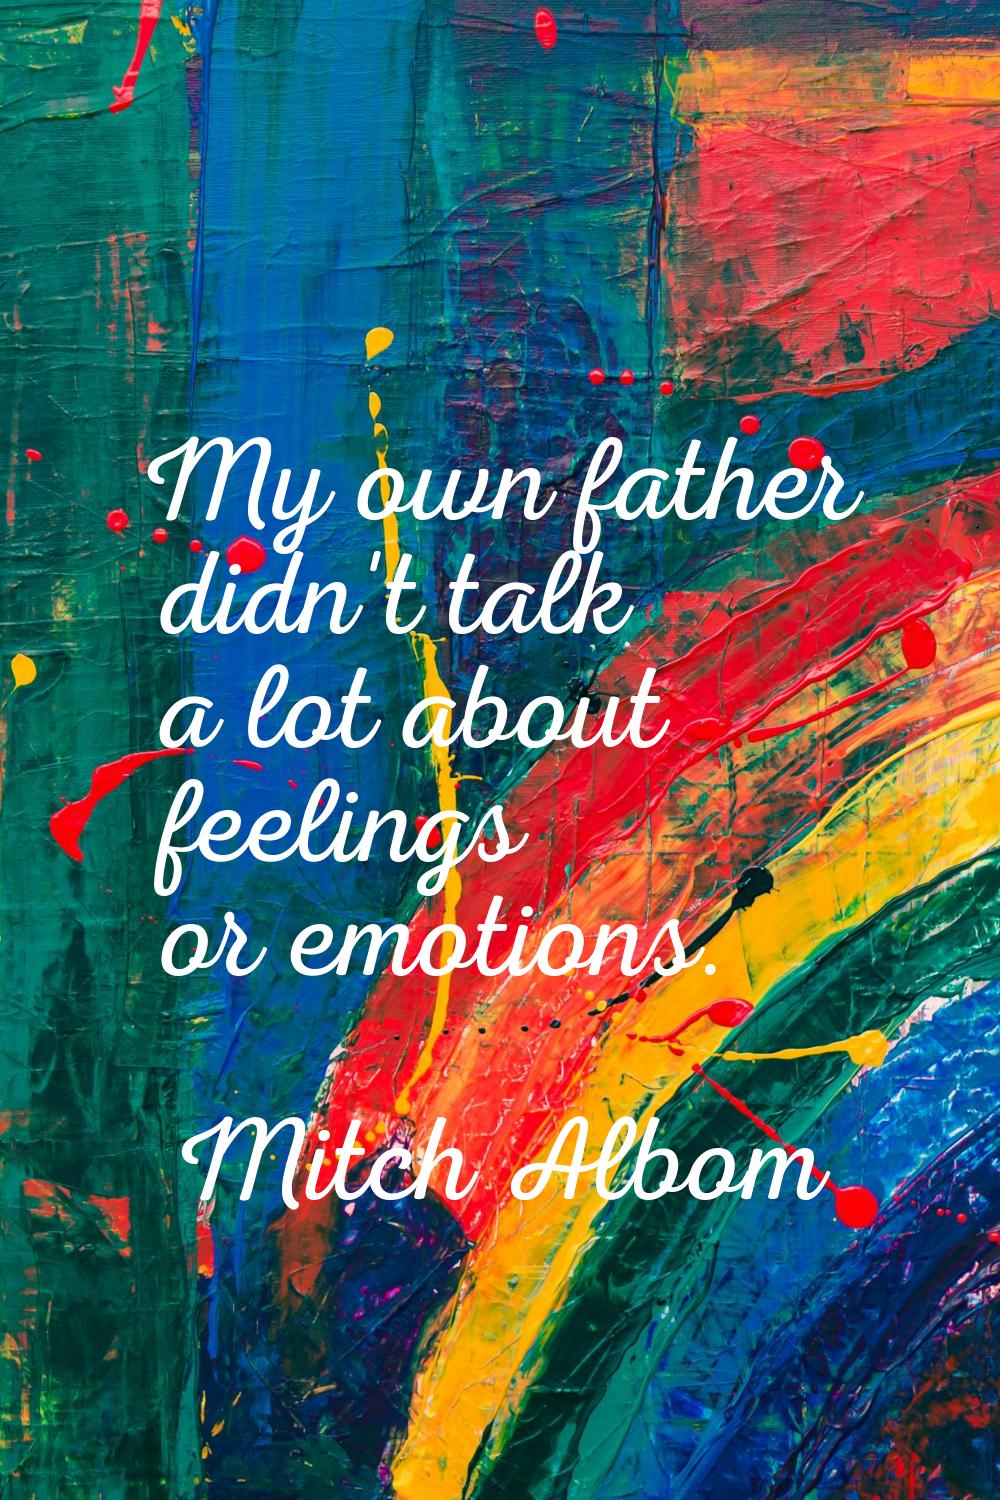 My own father didn't talk a lot about feelings or emotions.